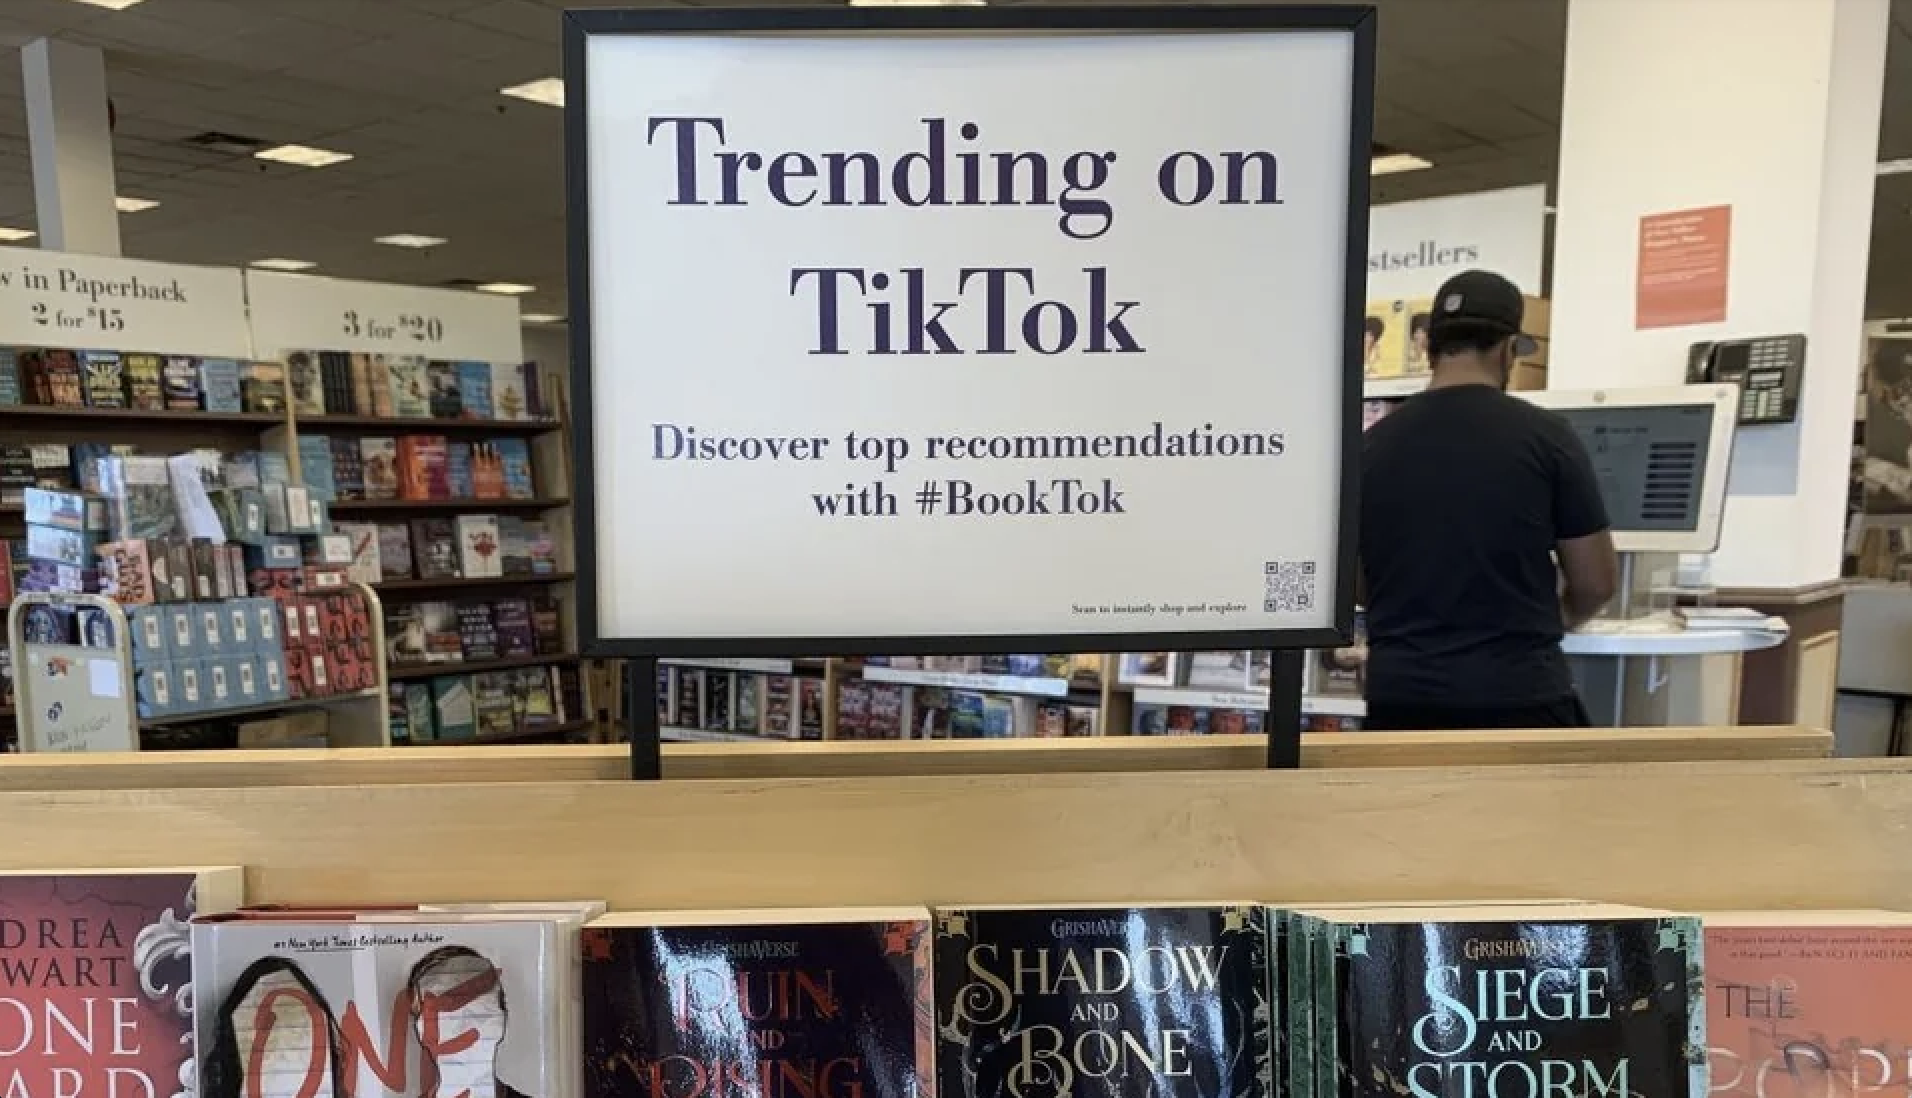 Sign reading &#x27;Trending on TikTok - Discover top recommendations with #BookTok&#x27; above a bookstore display